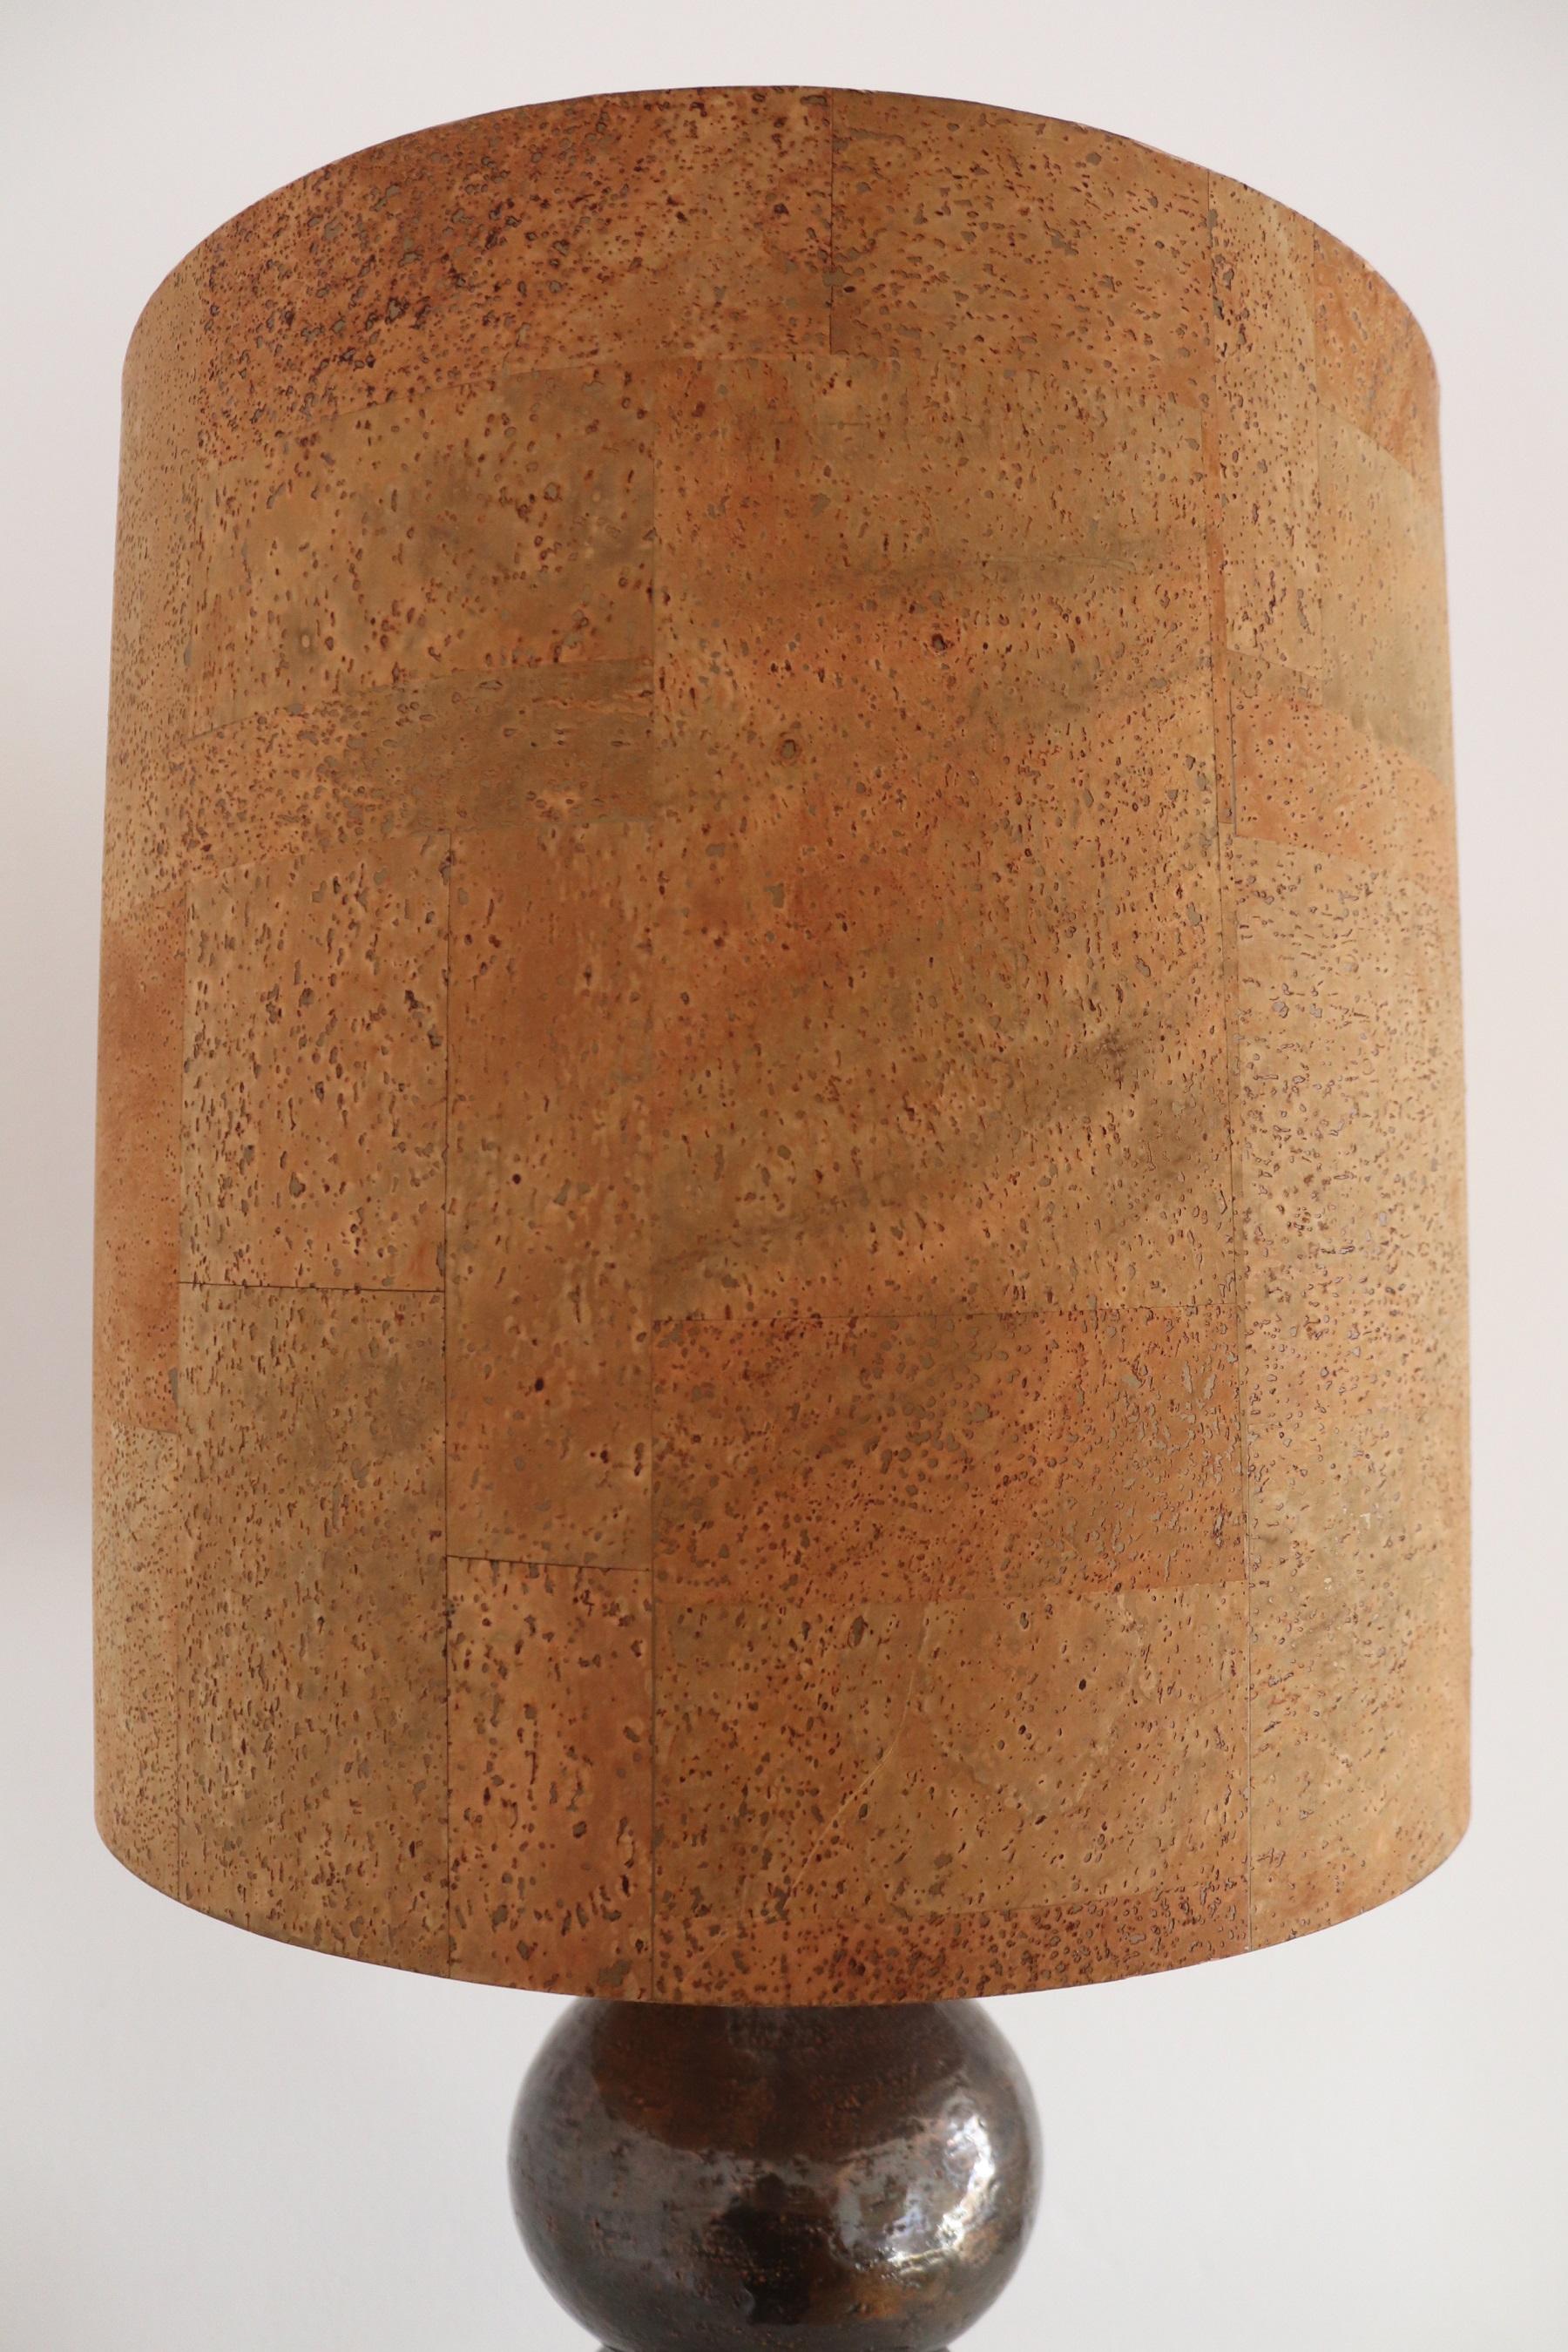 Italian Ceramic Table Lamp by Aldo Londi with Cork Lampshade, 1960 For Sale 3